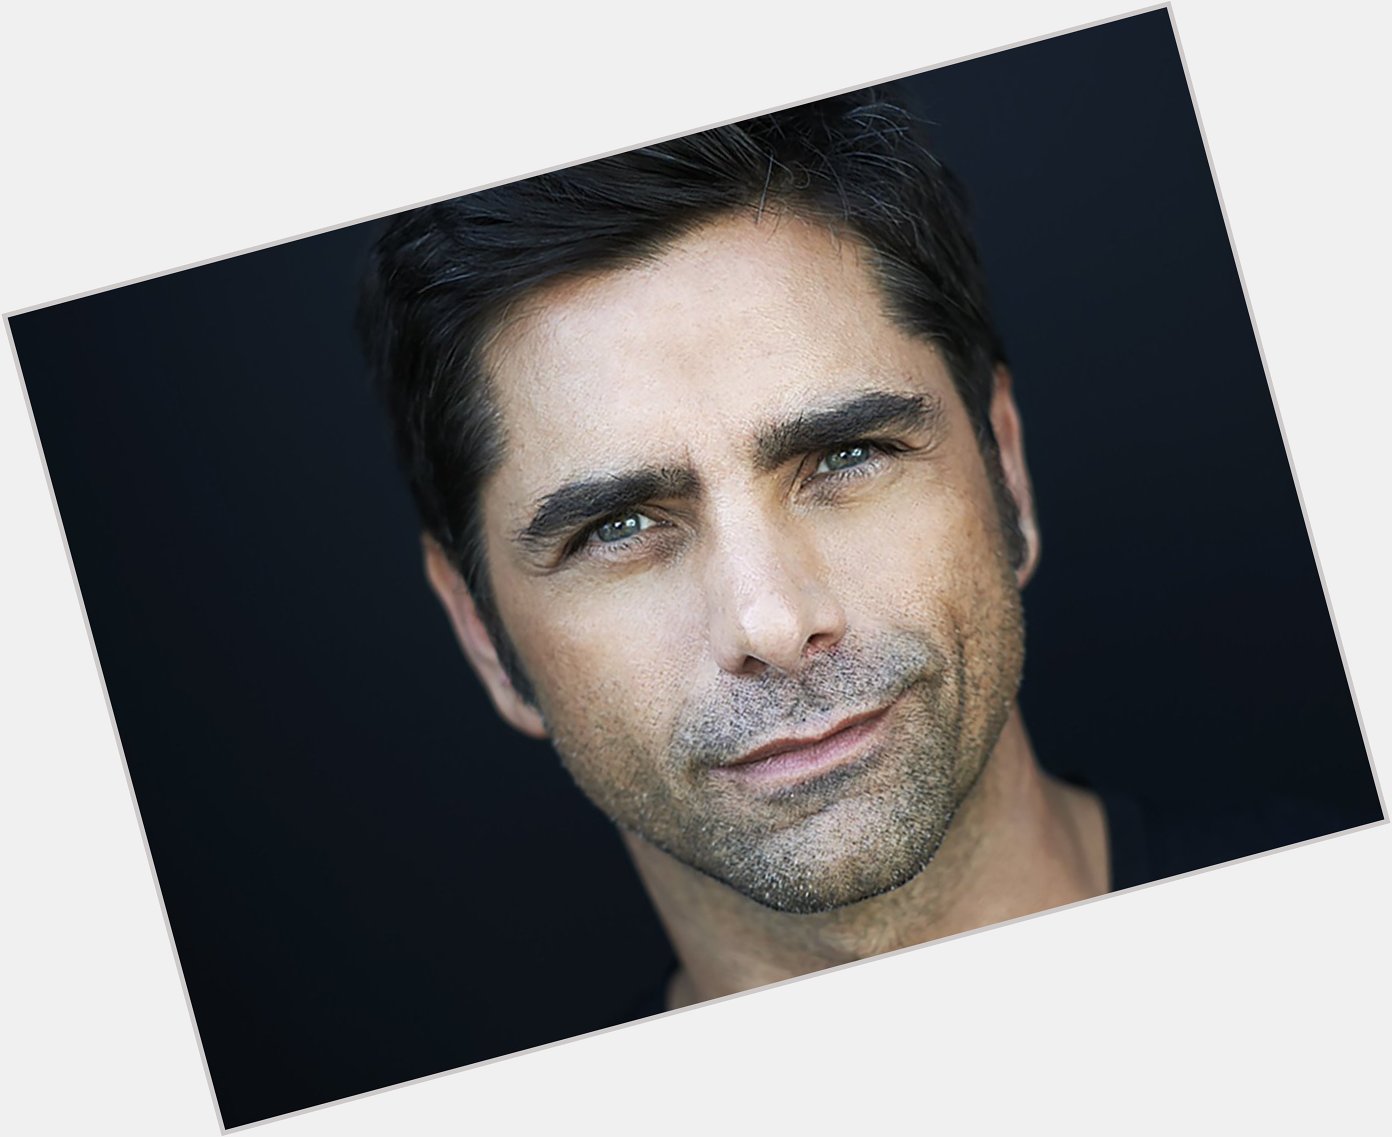 Happy birthday to everyone\s favorite Uncle Jesse, John Stamos!!

Which is your favorite role of the actor/musician? 